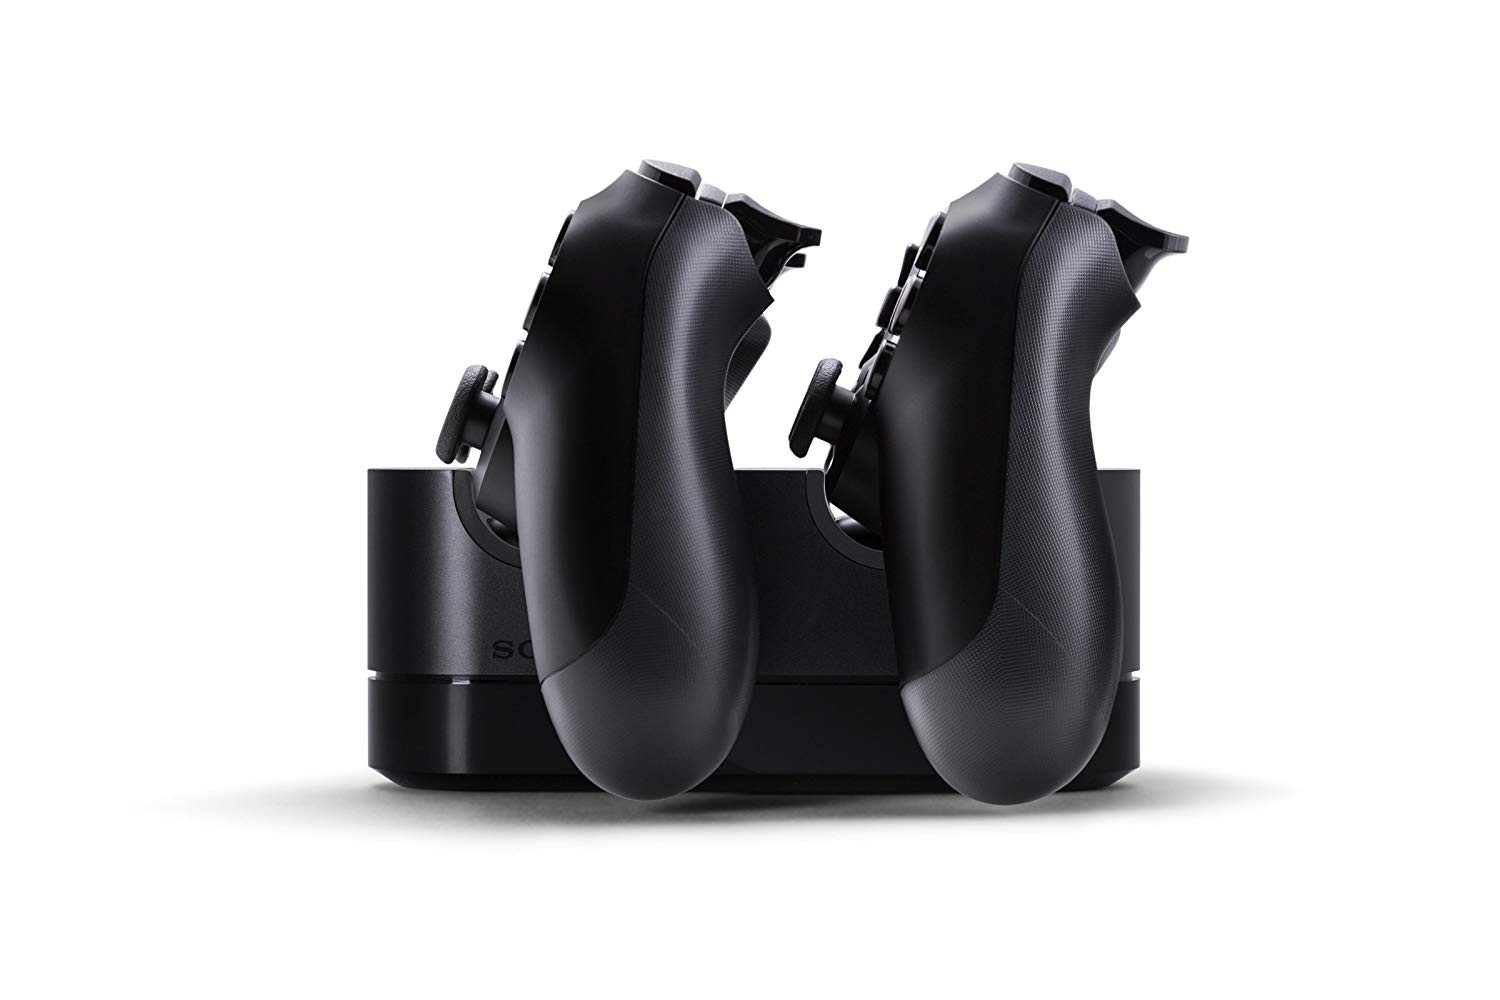 SONY PS4 Dualshock Charging Station